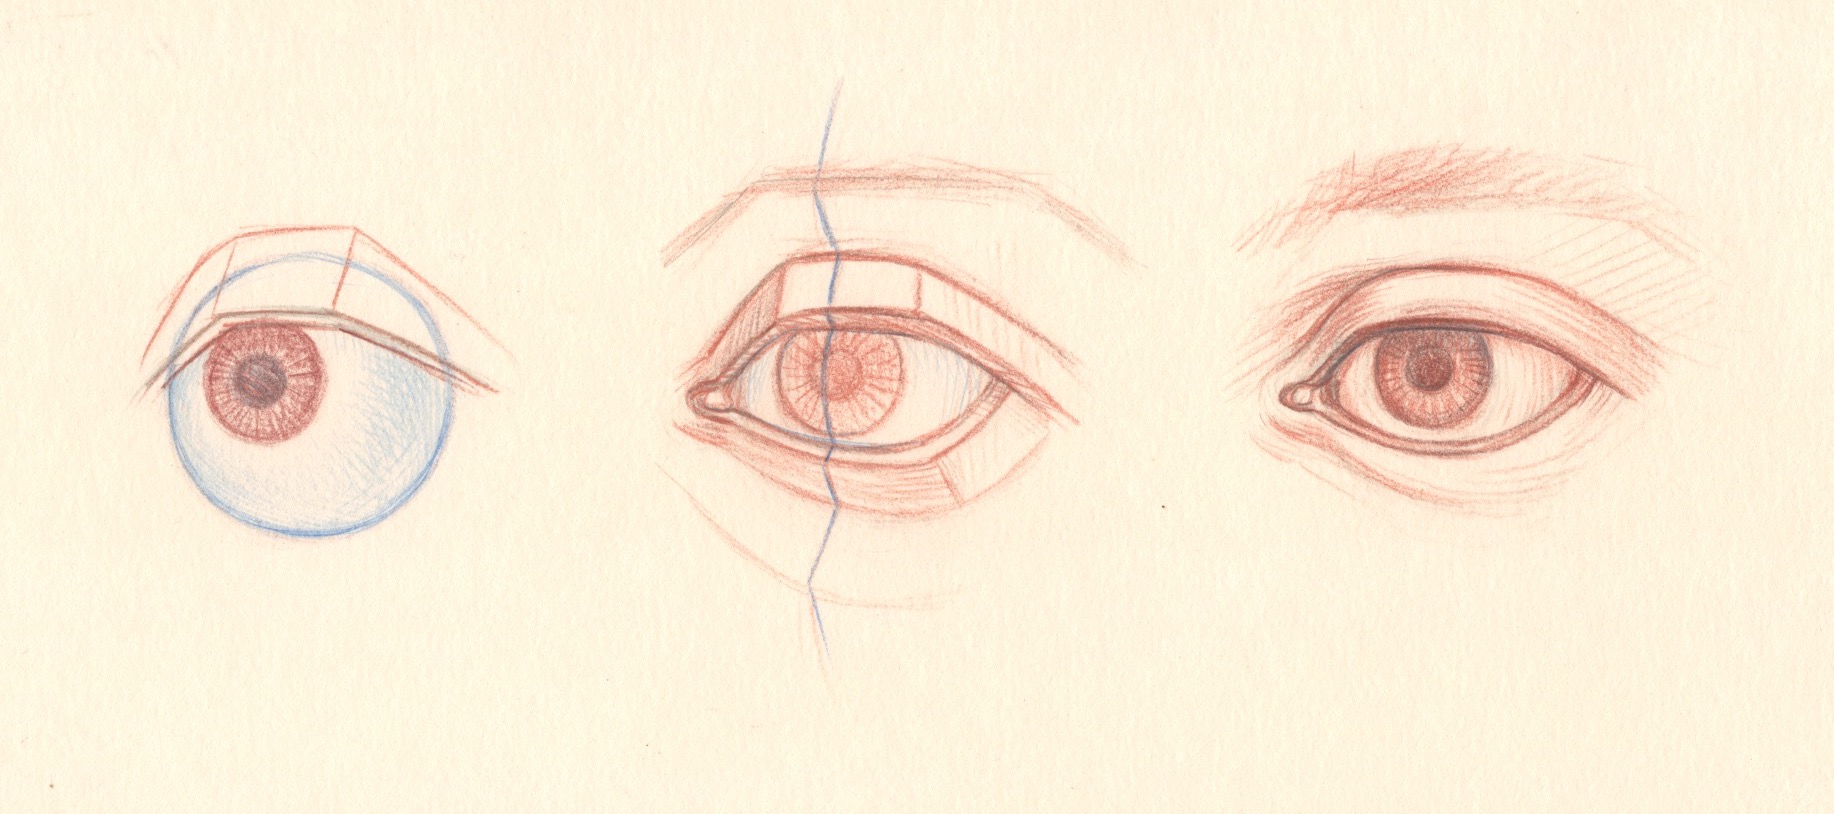 Open Drawing Session | Take a look: Drawing Eyes